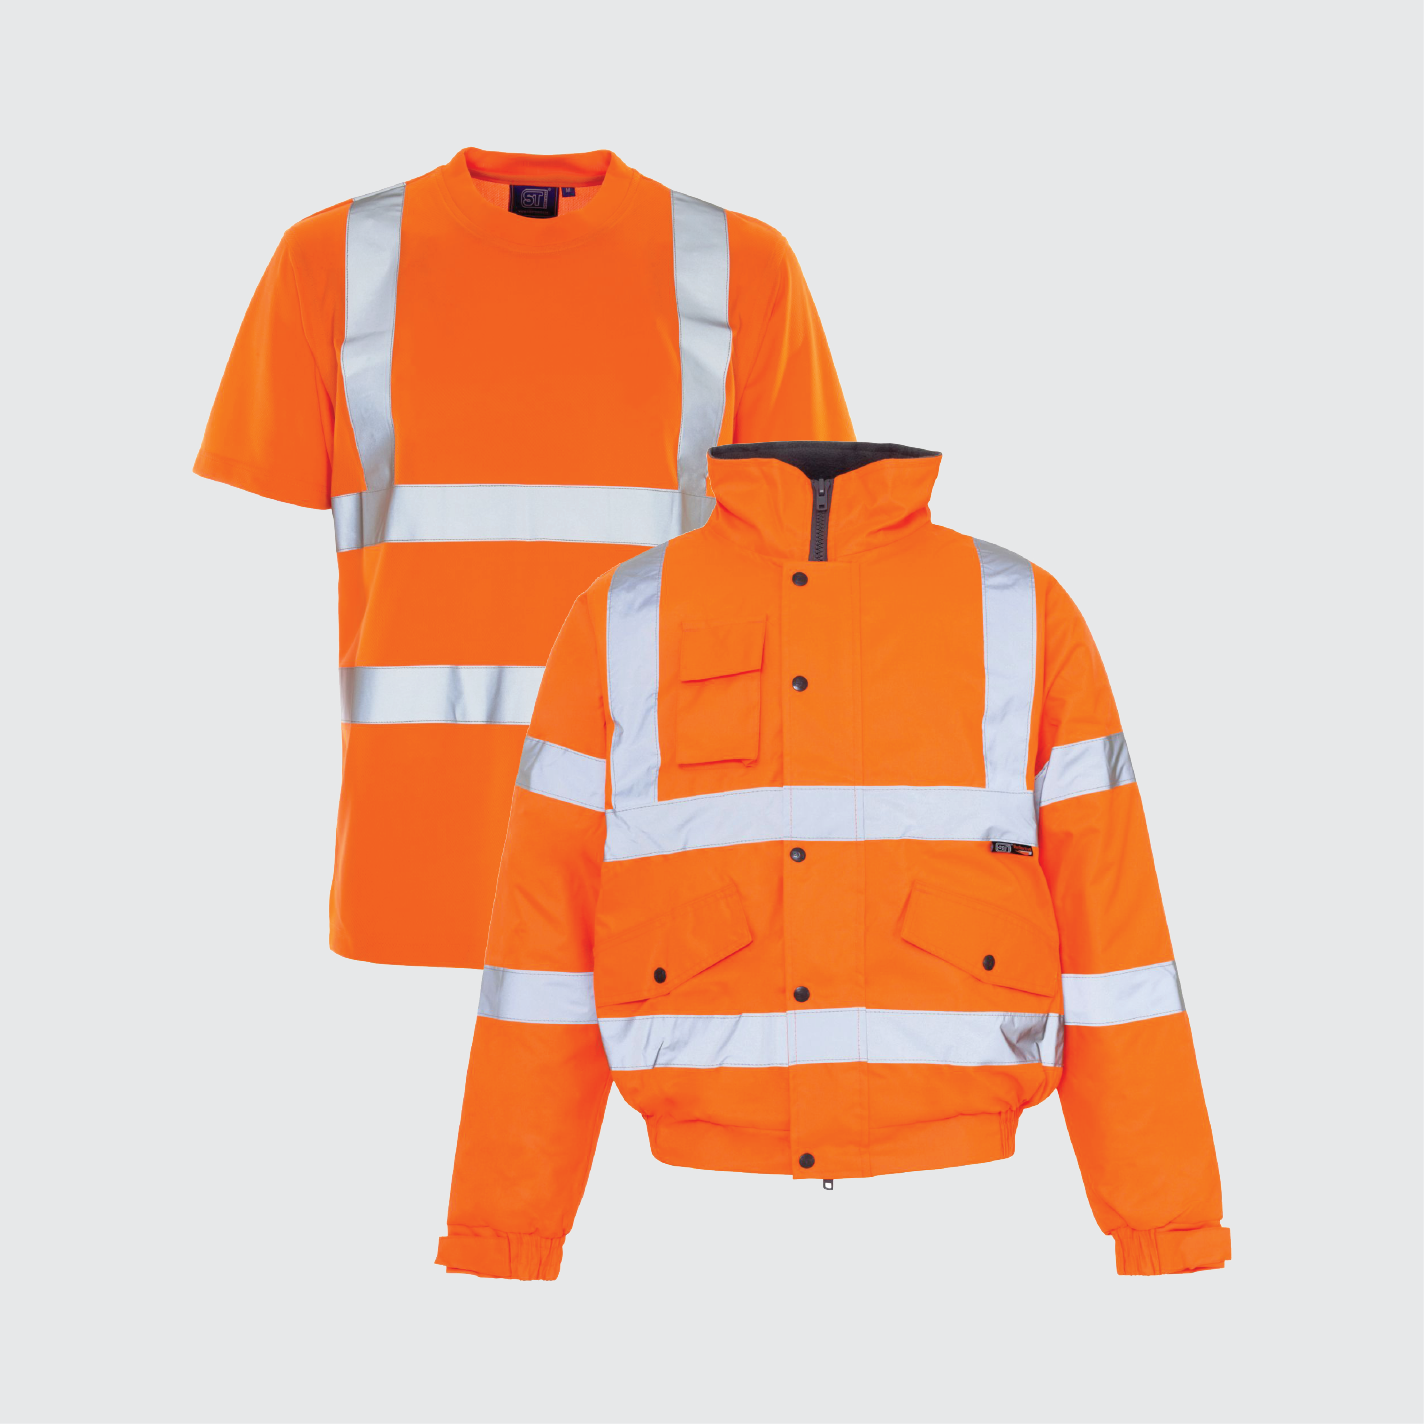 4+2 Hi Vis T-shirt and Bomber Jackets - FREE LOGO & DELIVERY